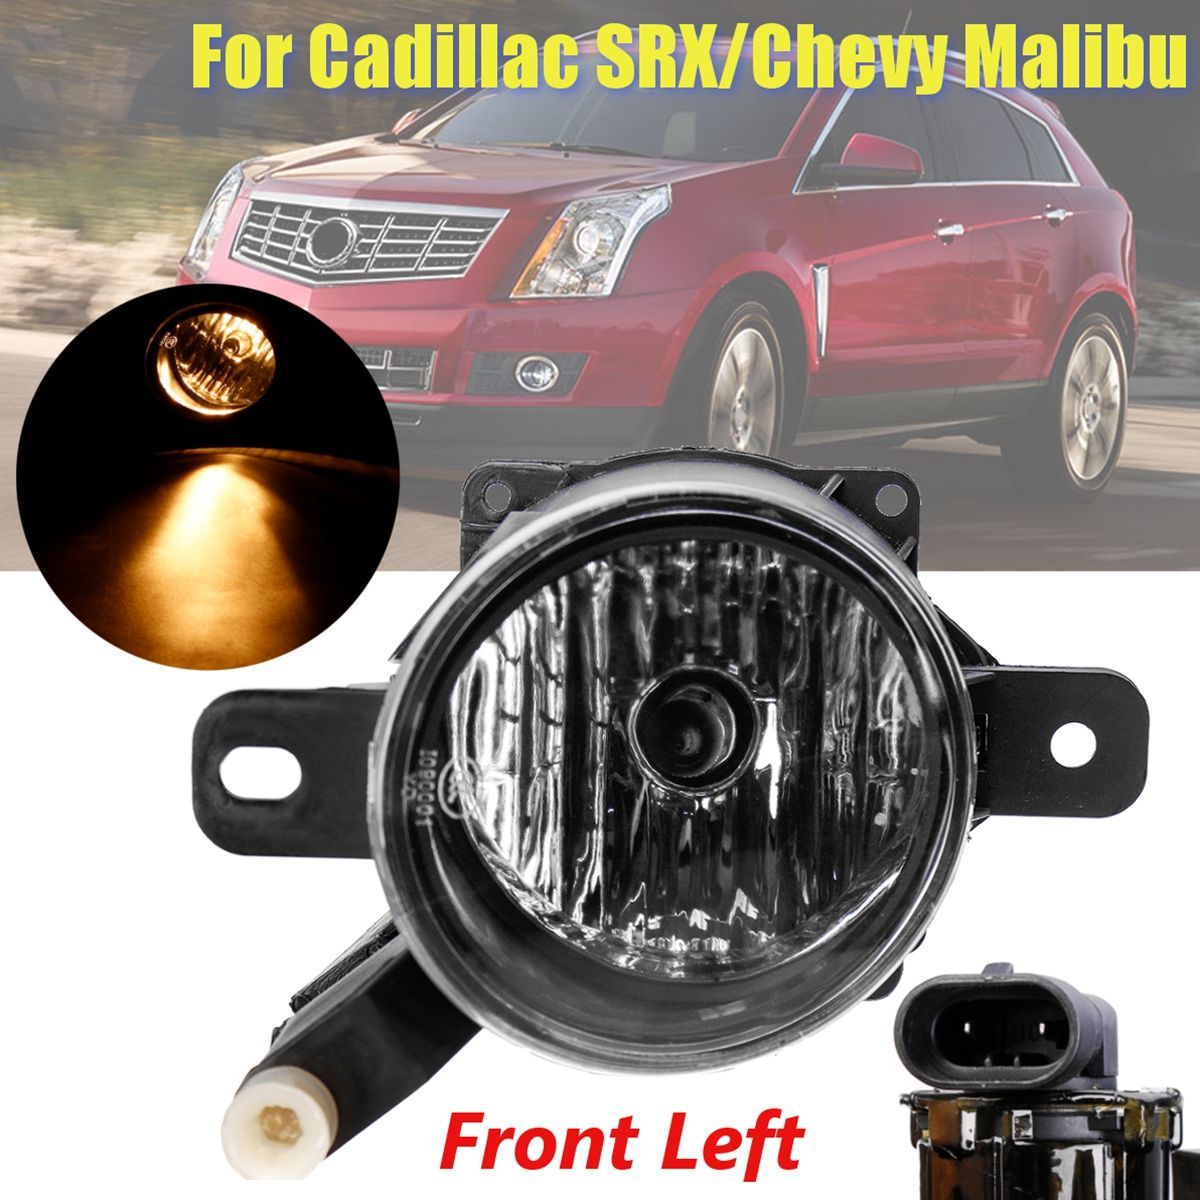 Front-Left-Car-Halogen-Fog-Driving-Lights-Lamp-for-Saturn-Astra-Cadillac-SRX-Chevy-Malibu-SS-1382558